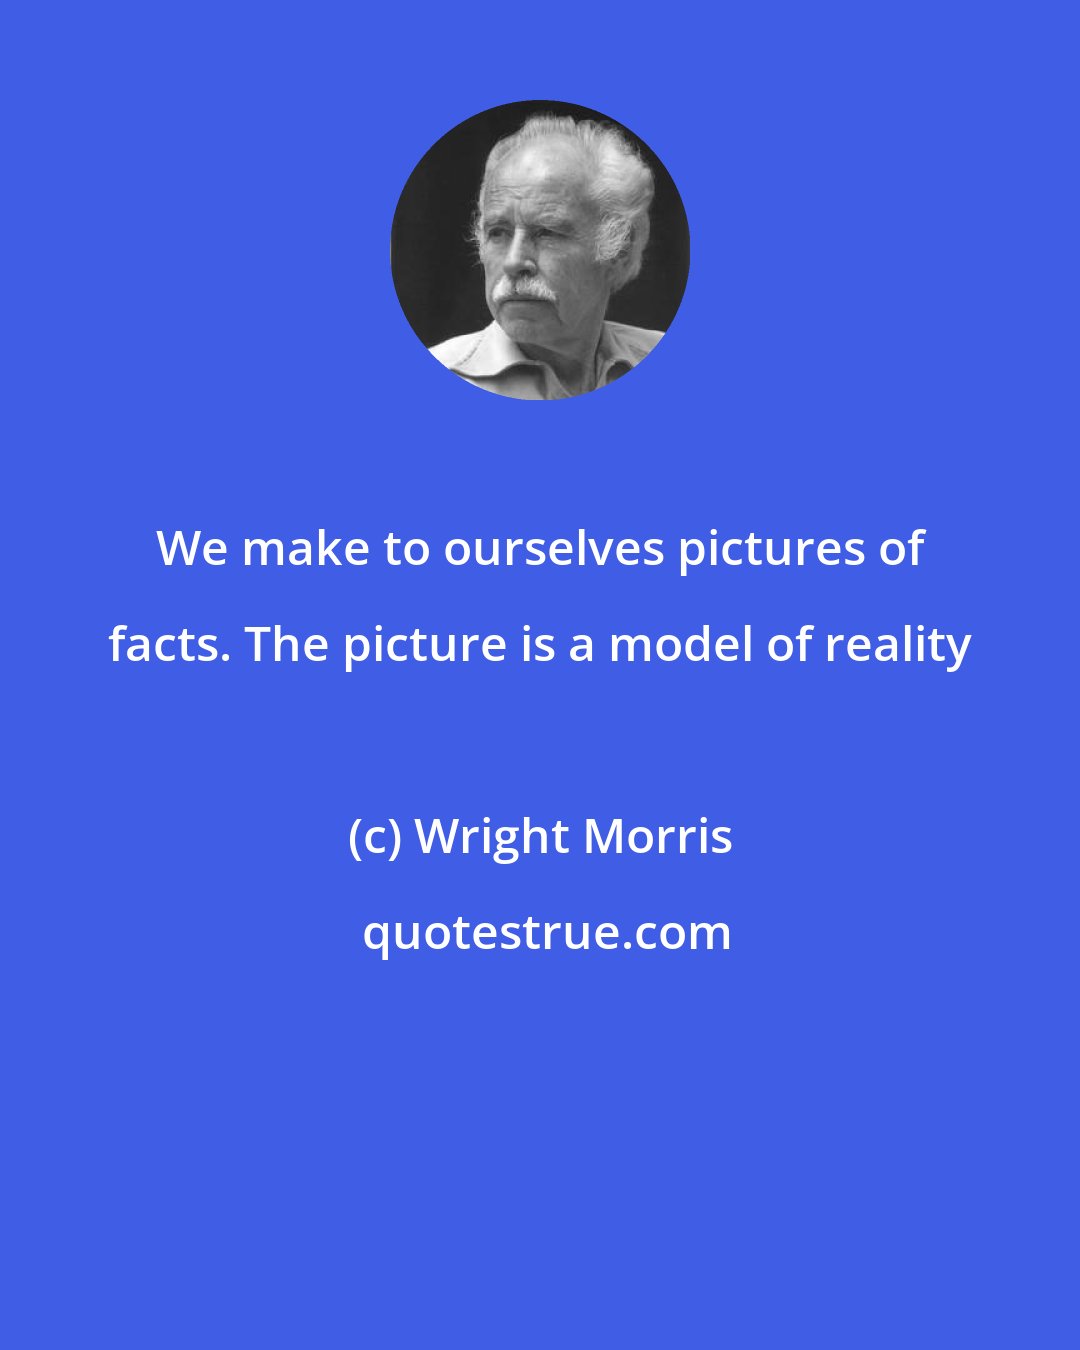 Wright Morris: We make to ourselves pictures of facts. The picture is a model of reality